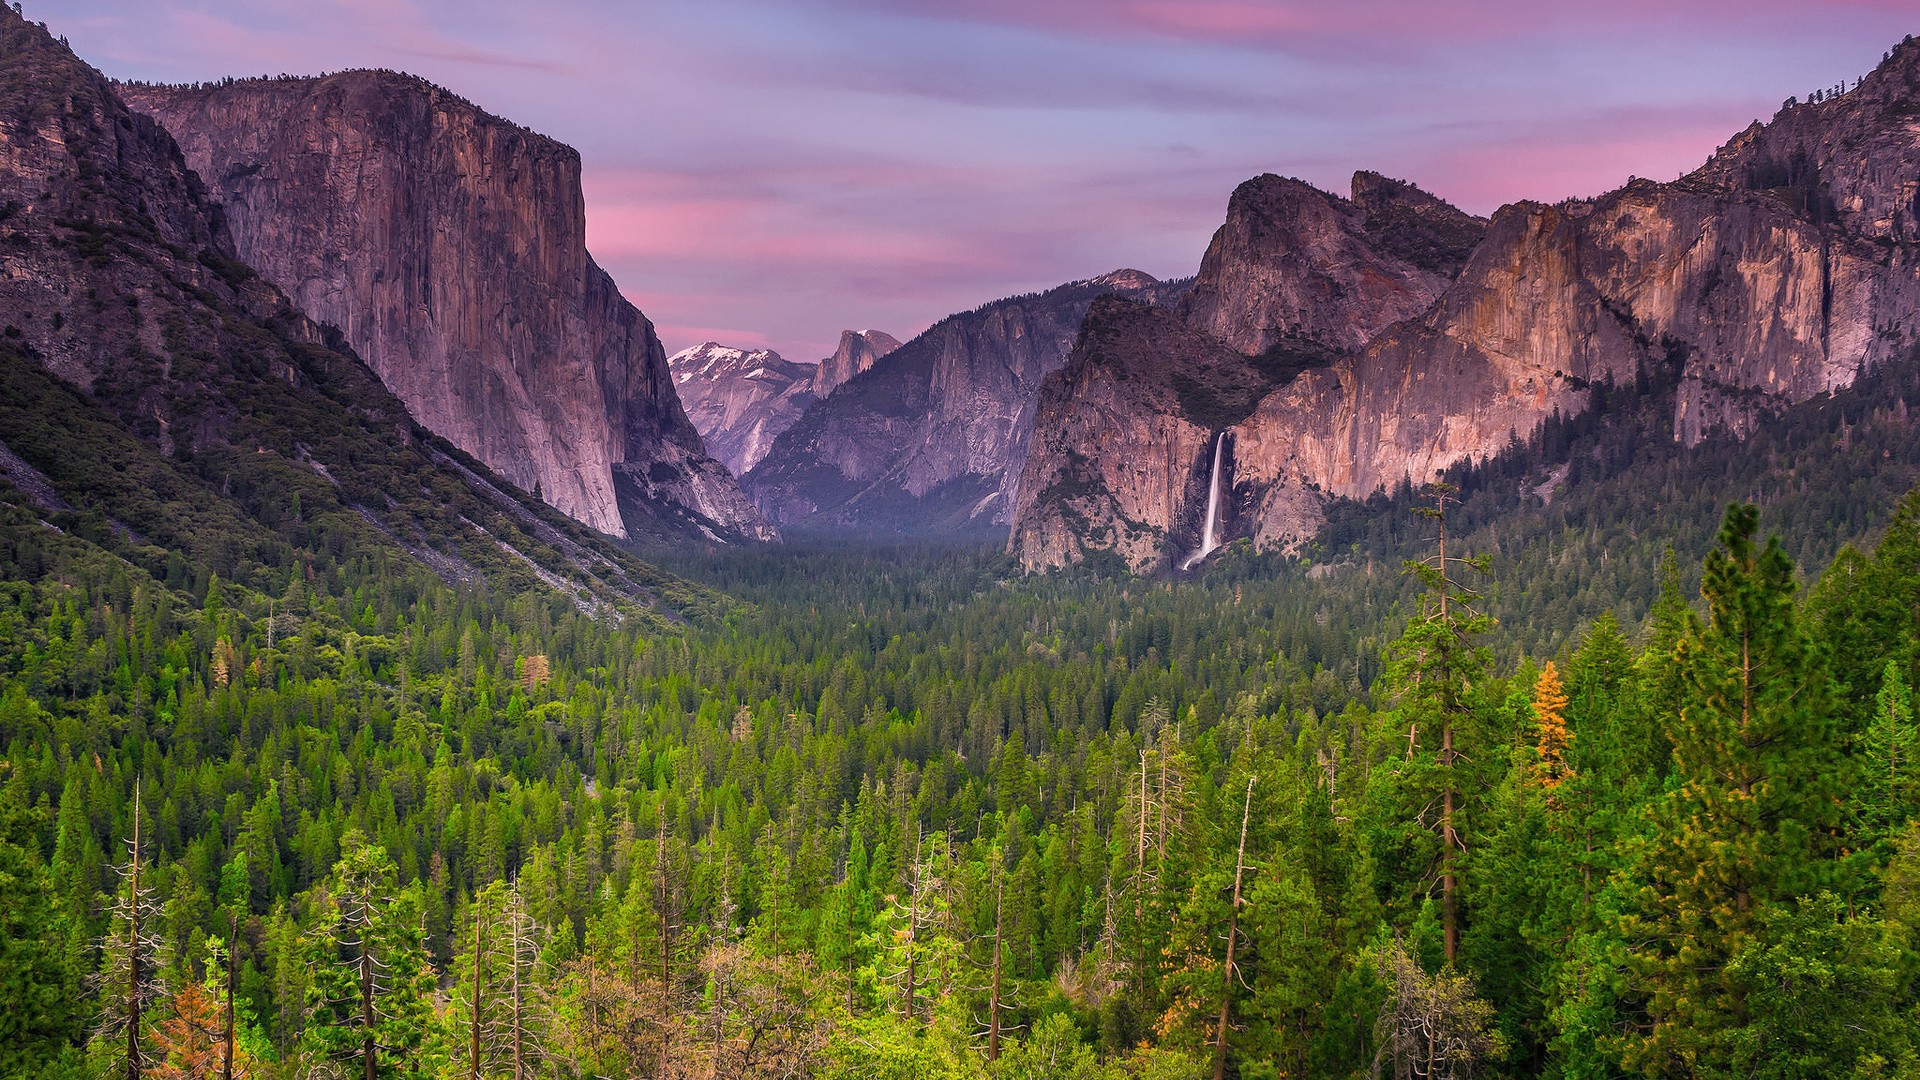 General 1920x1080 nature landscape mountains clouds trees forest water California USA waterfall sunset rocks Yosemite National Park El Capitan